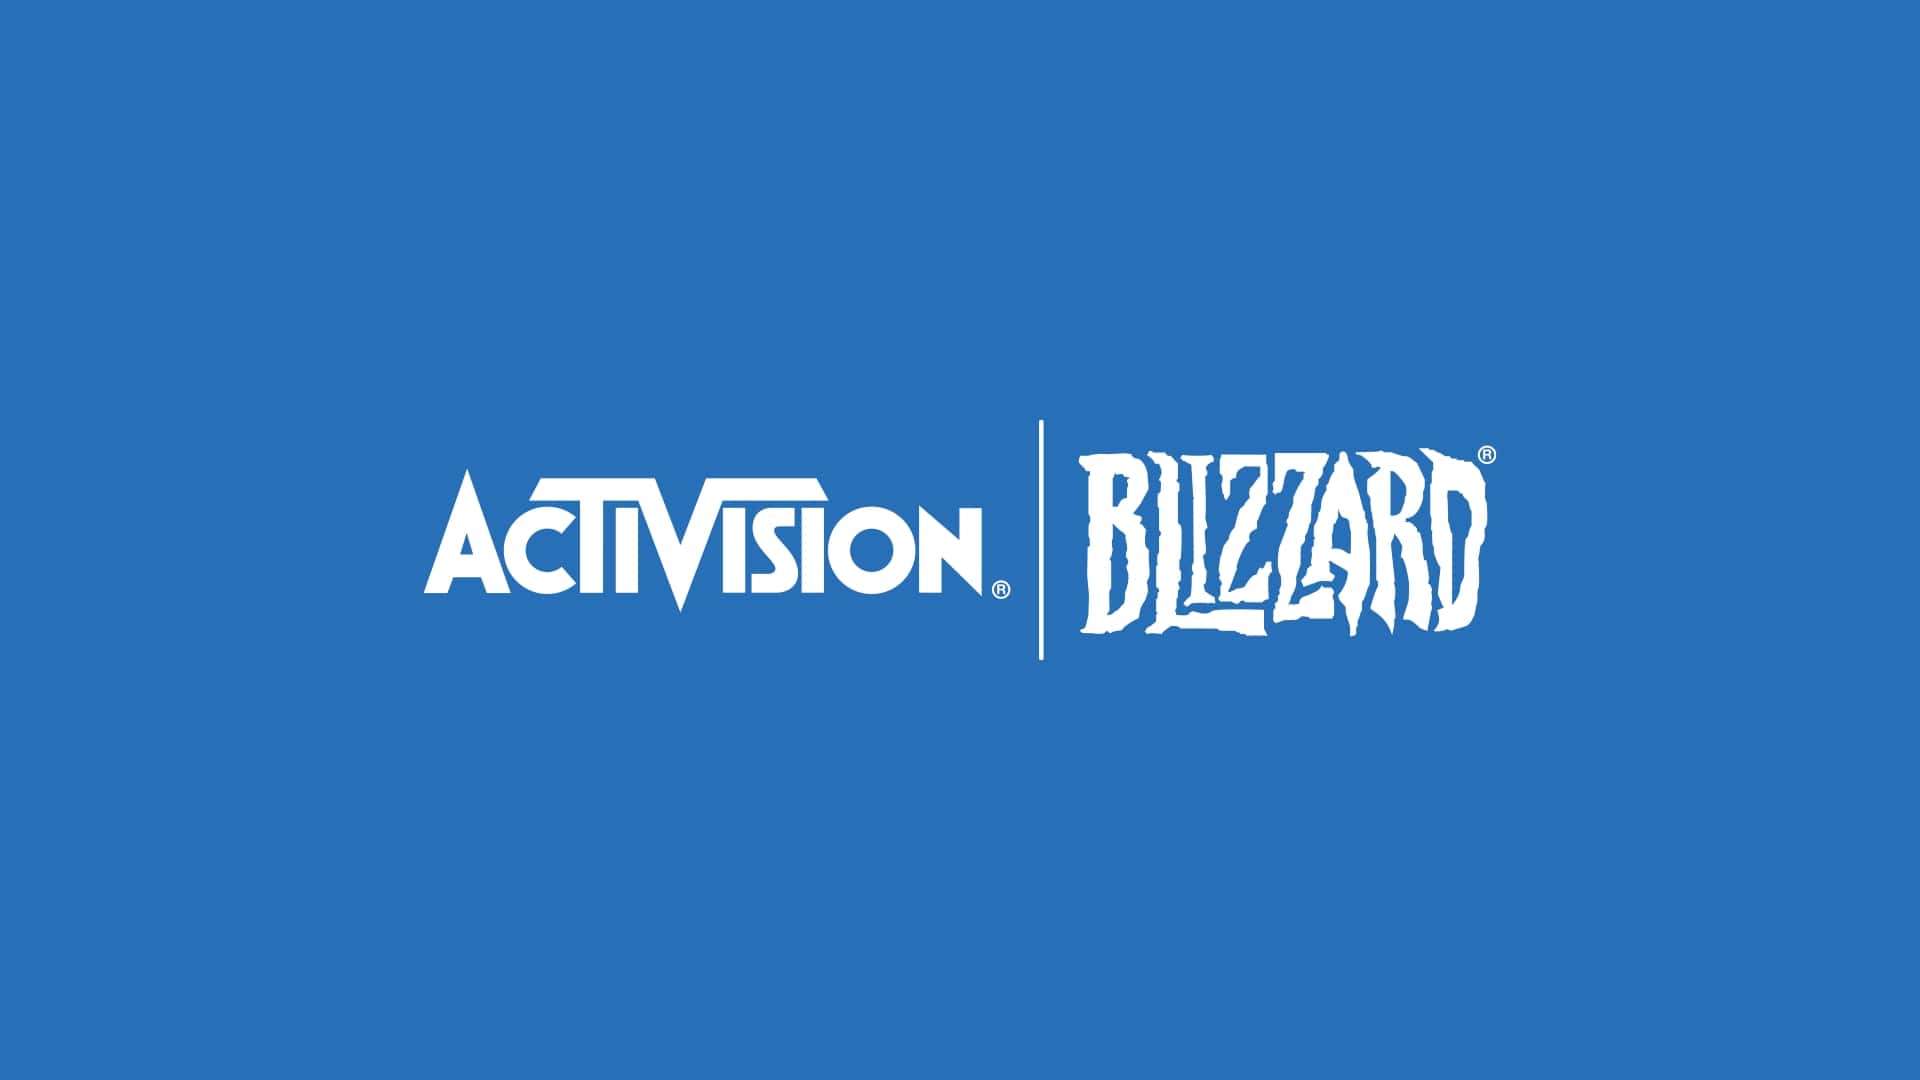 What's Happening With Activision Blizzard Stock?